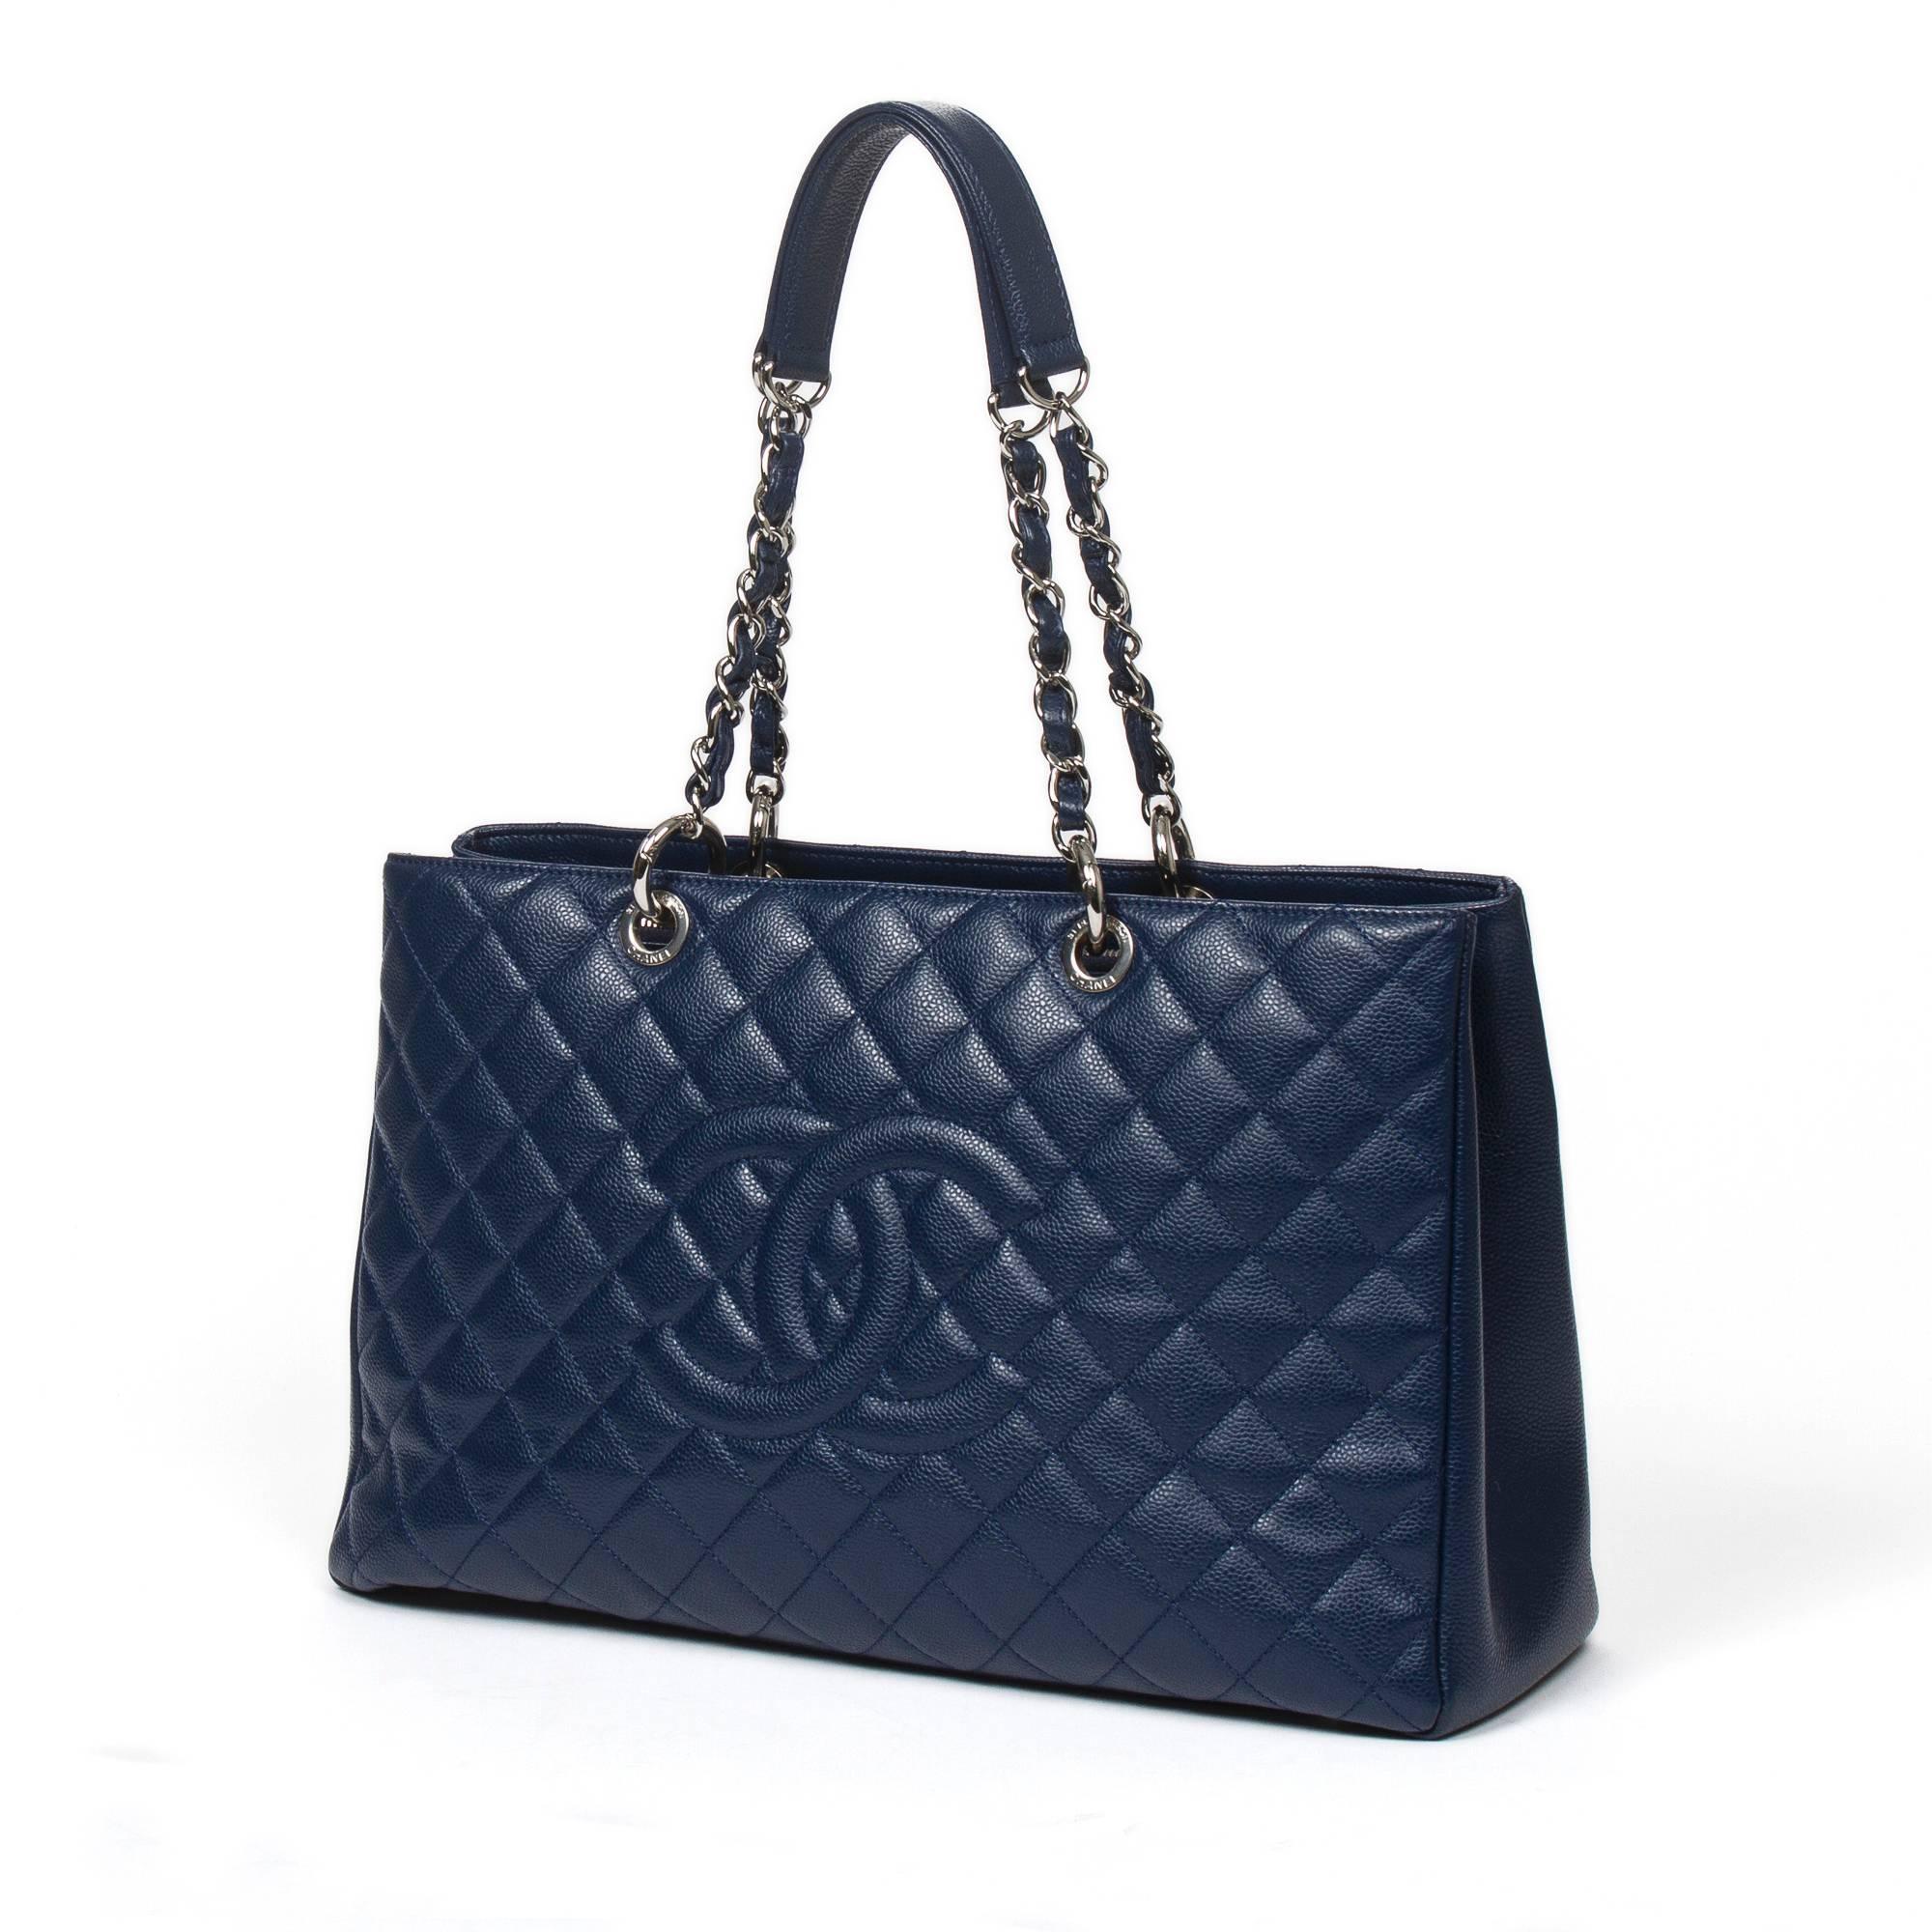 Grand Tote Shopping XL in navy blue quilted caviar leather with chain and leather straps, silver tone hardware. Back slip pocket. 4 protective metal feet at the base. Grey satin lined interior with one zipped middle compartment, 2 slip pockets and